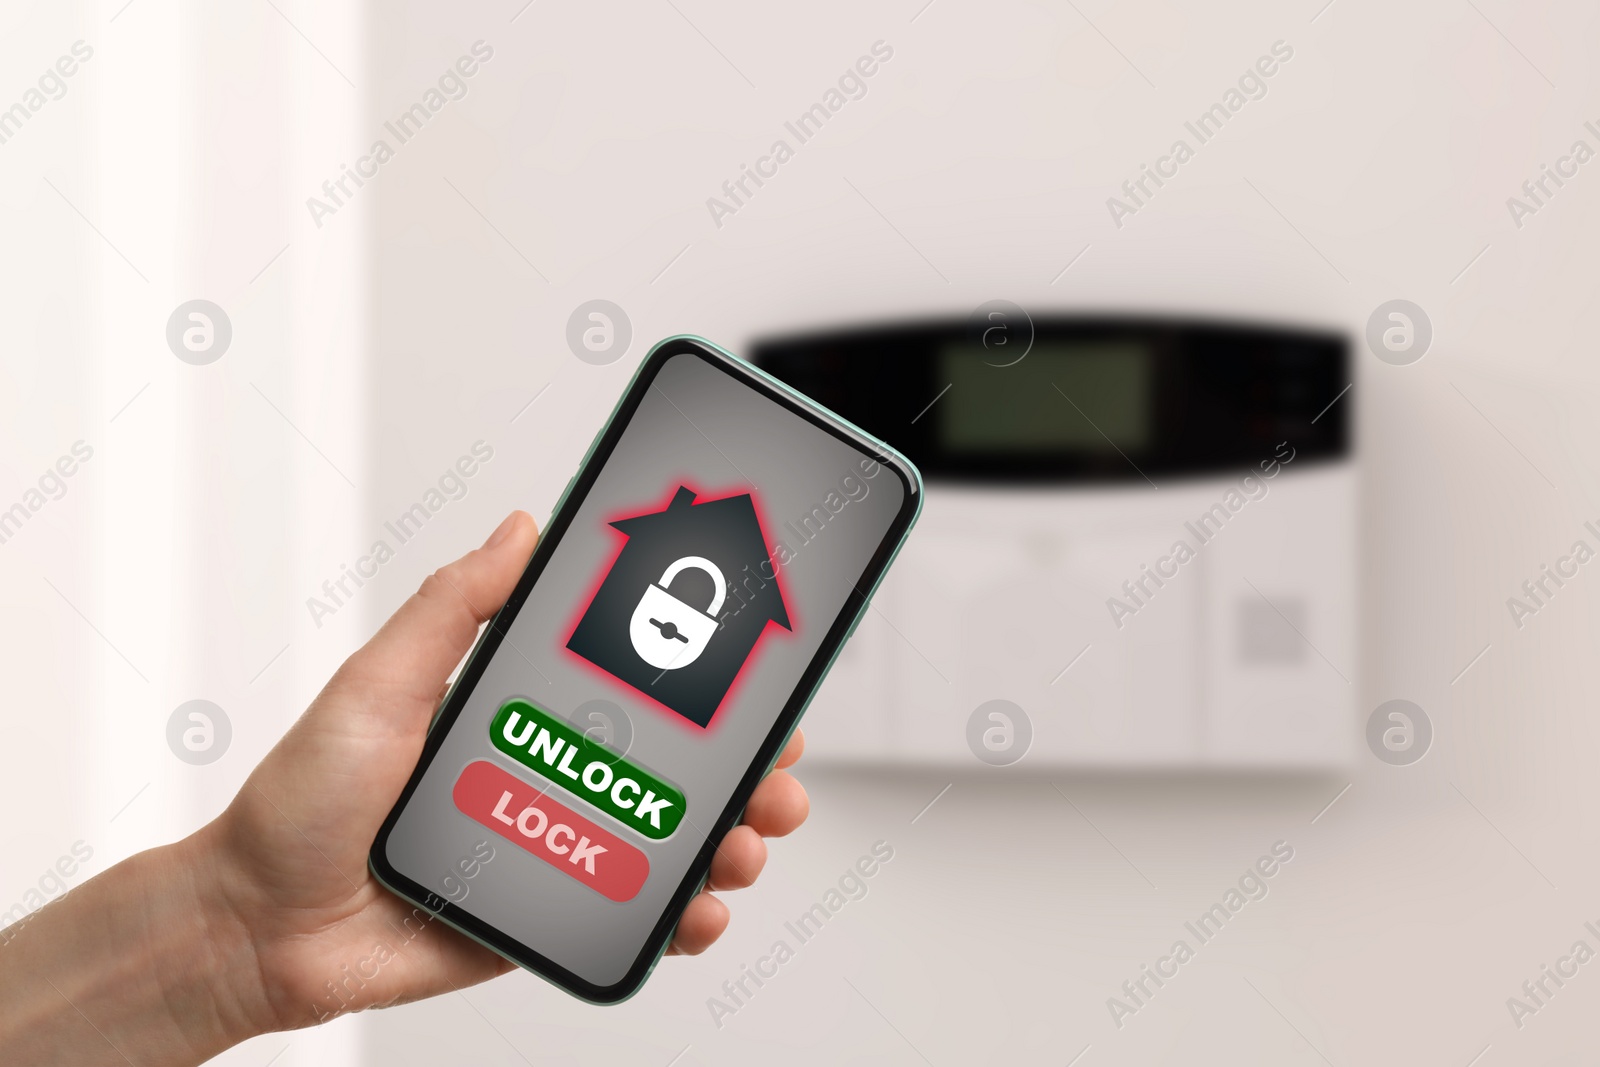 Image of Woman operating home alarm system via mobile phone against white wall with security control panel, closeup. Application interface on device screen